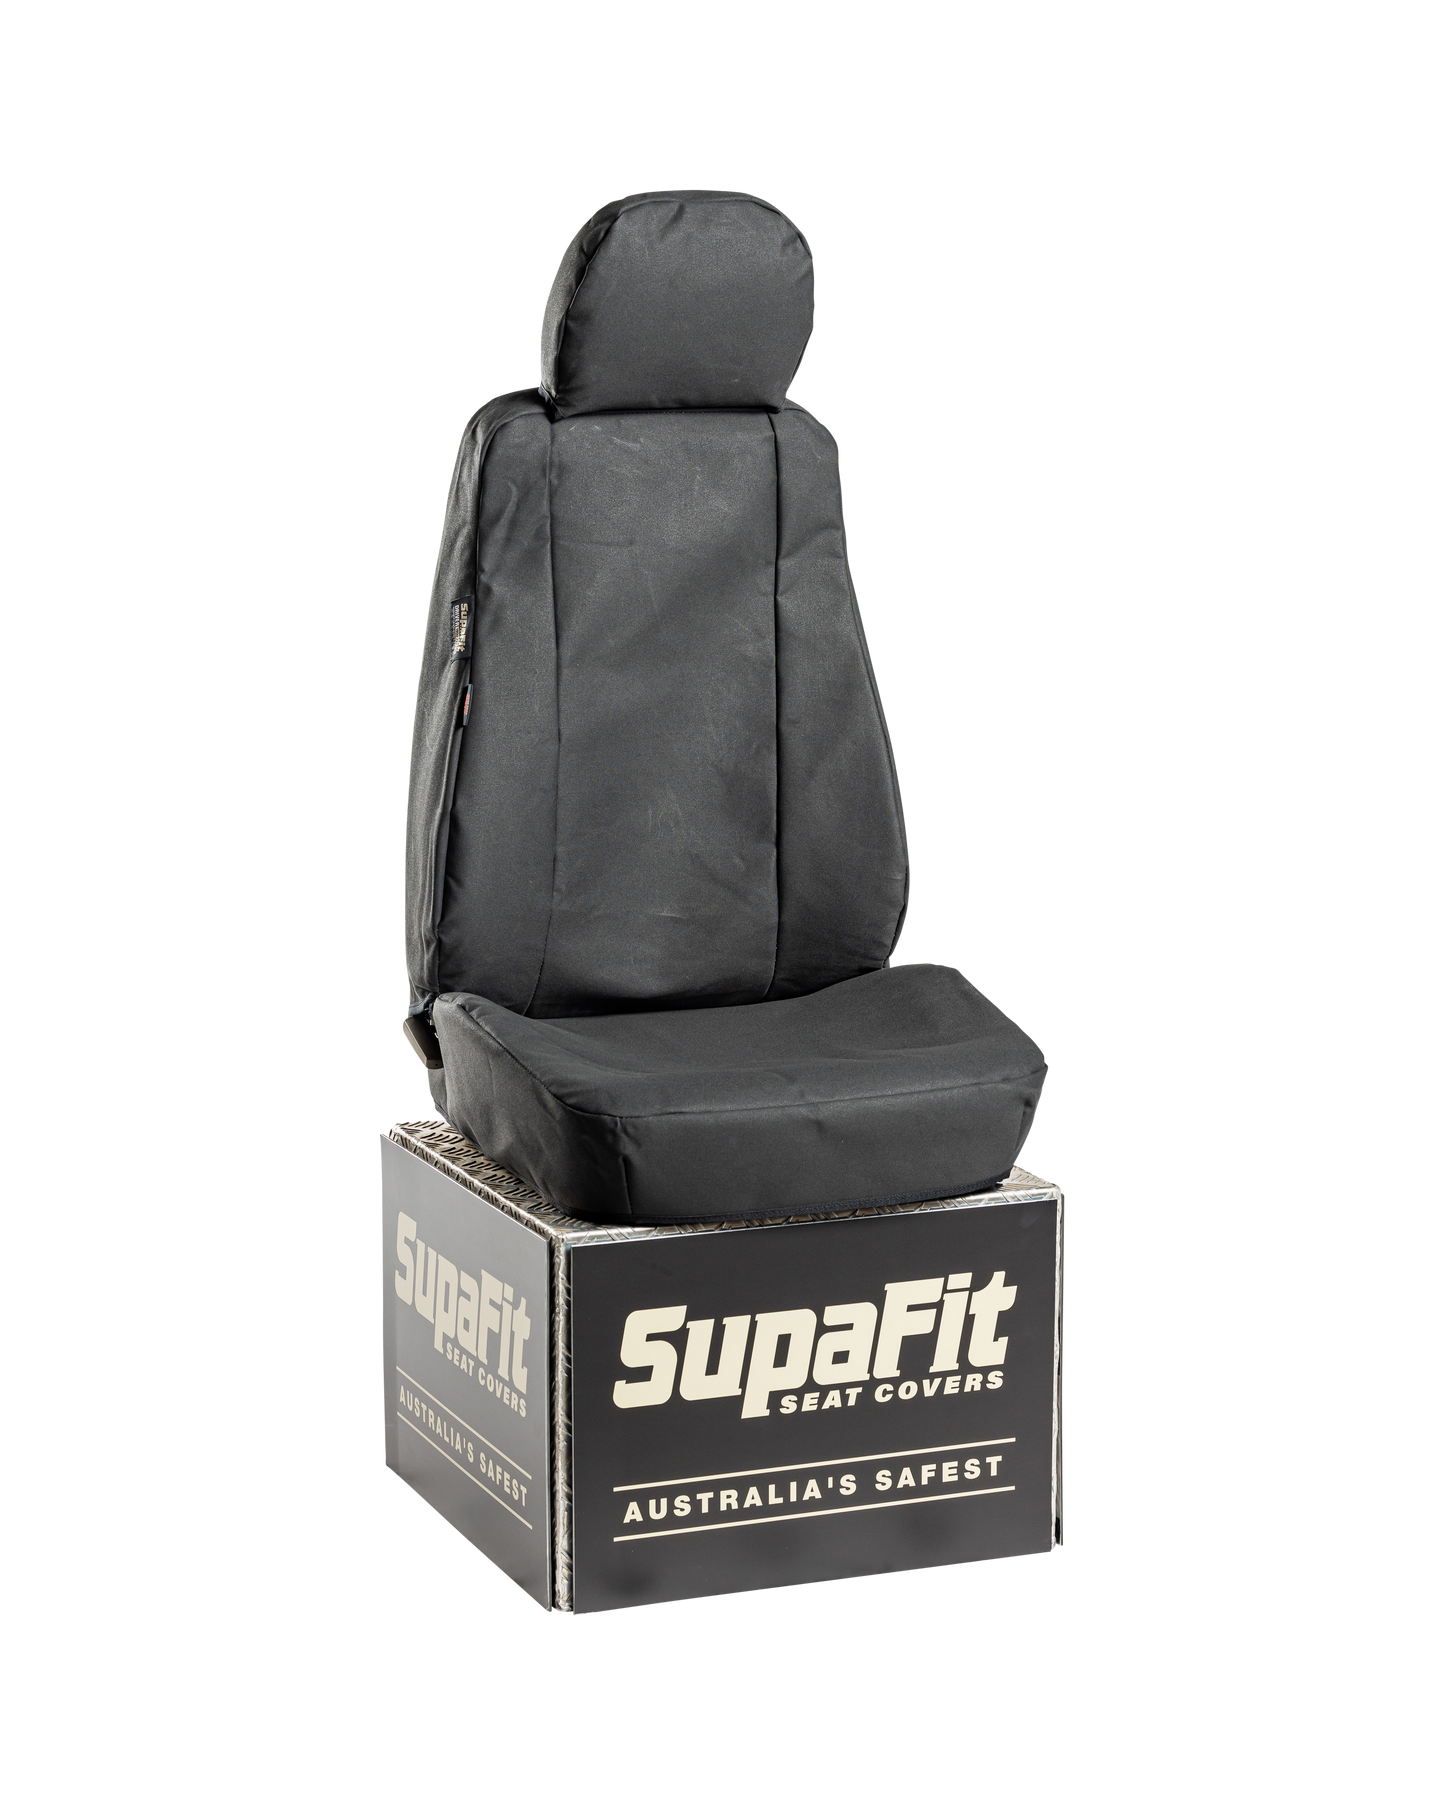 SUPAFIT Seat covers rear seats only - Essential4x4